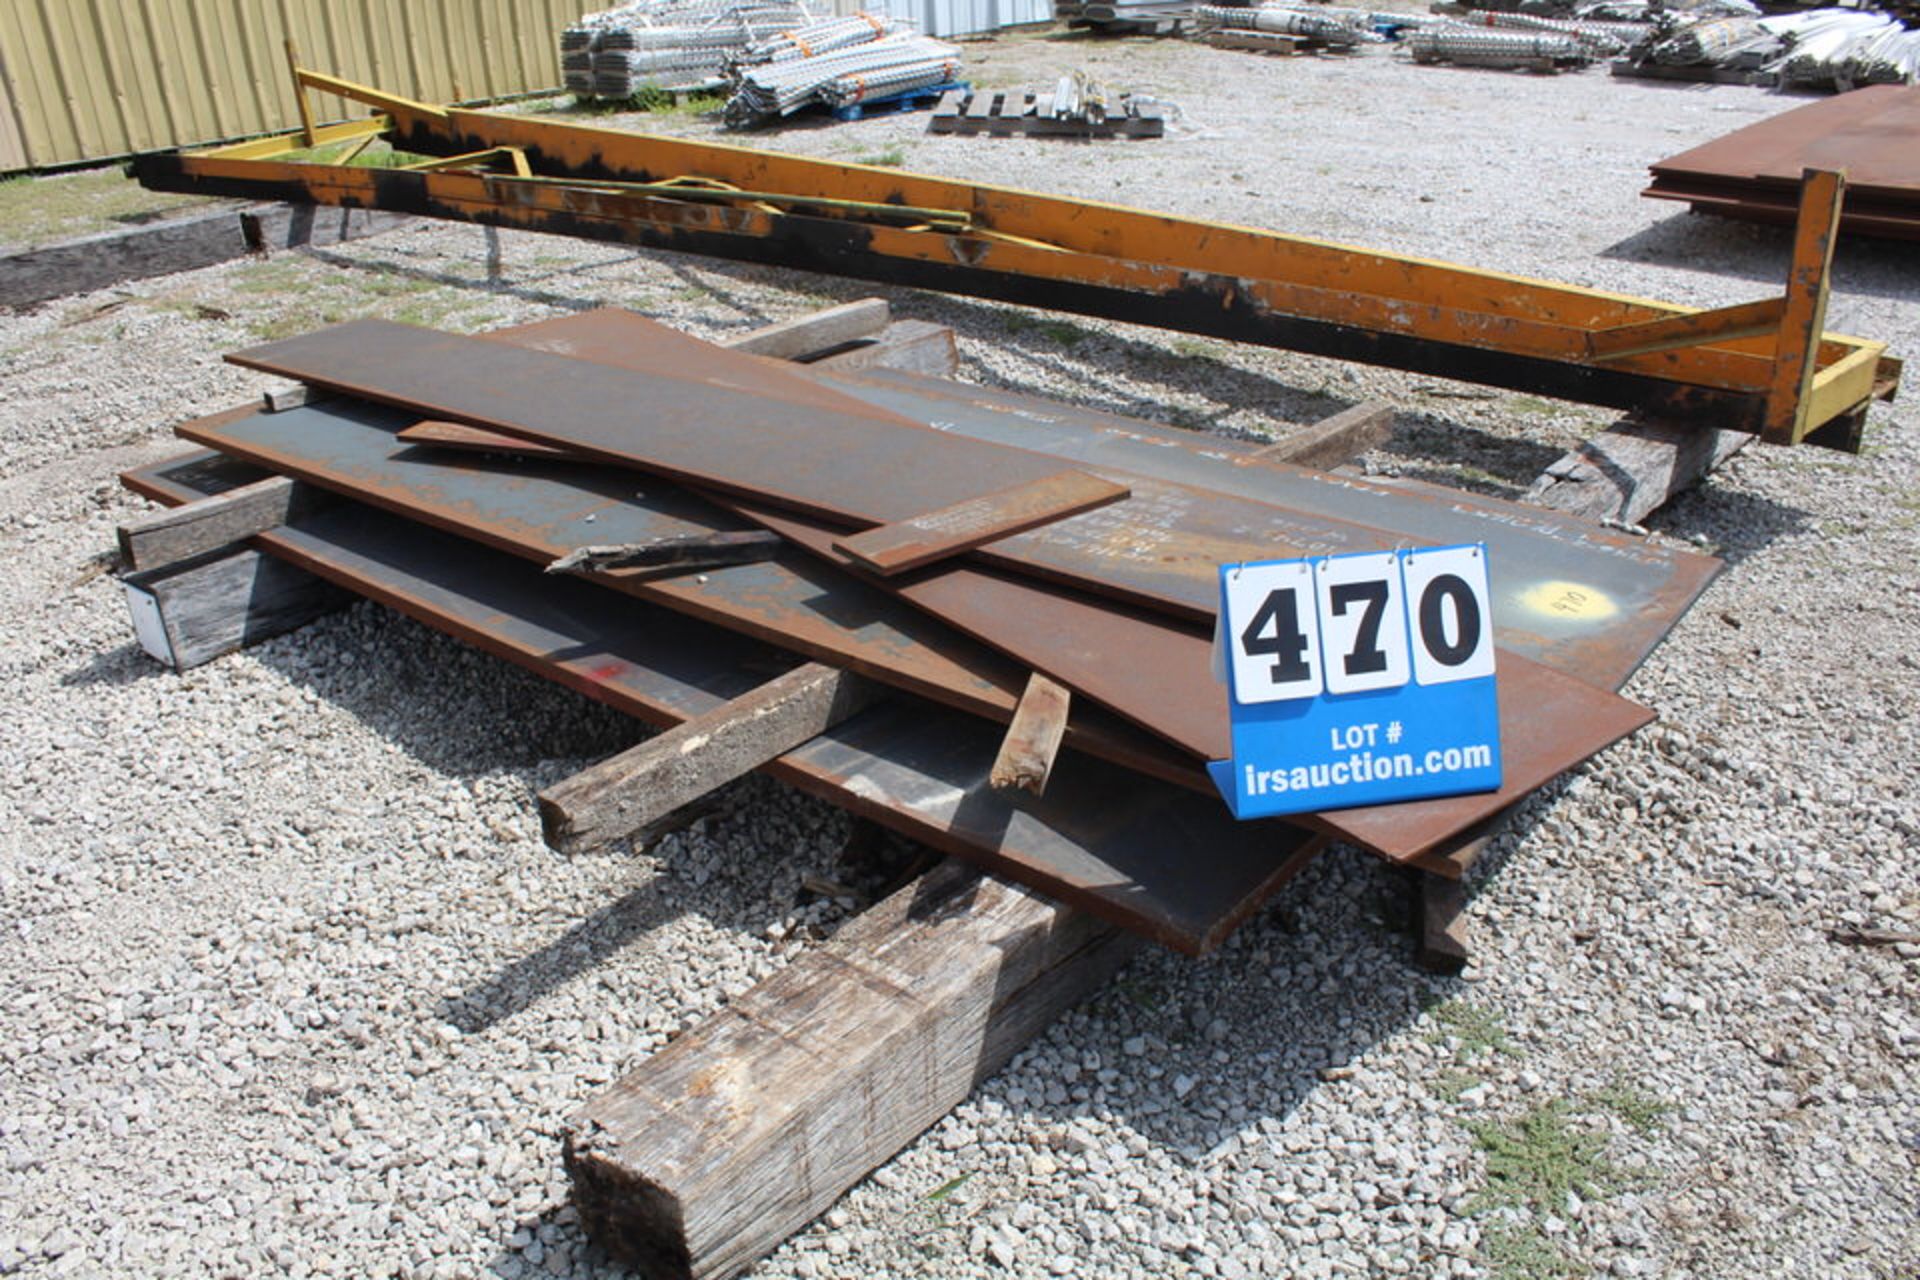 ASST 1"-1/2" CARBON STEEL PLATE (Location: 5202 West Channel Rd, Catoosa, OK 74015)